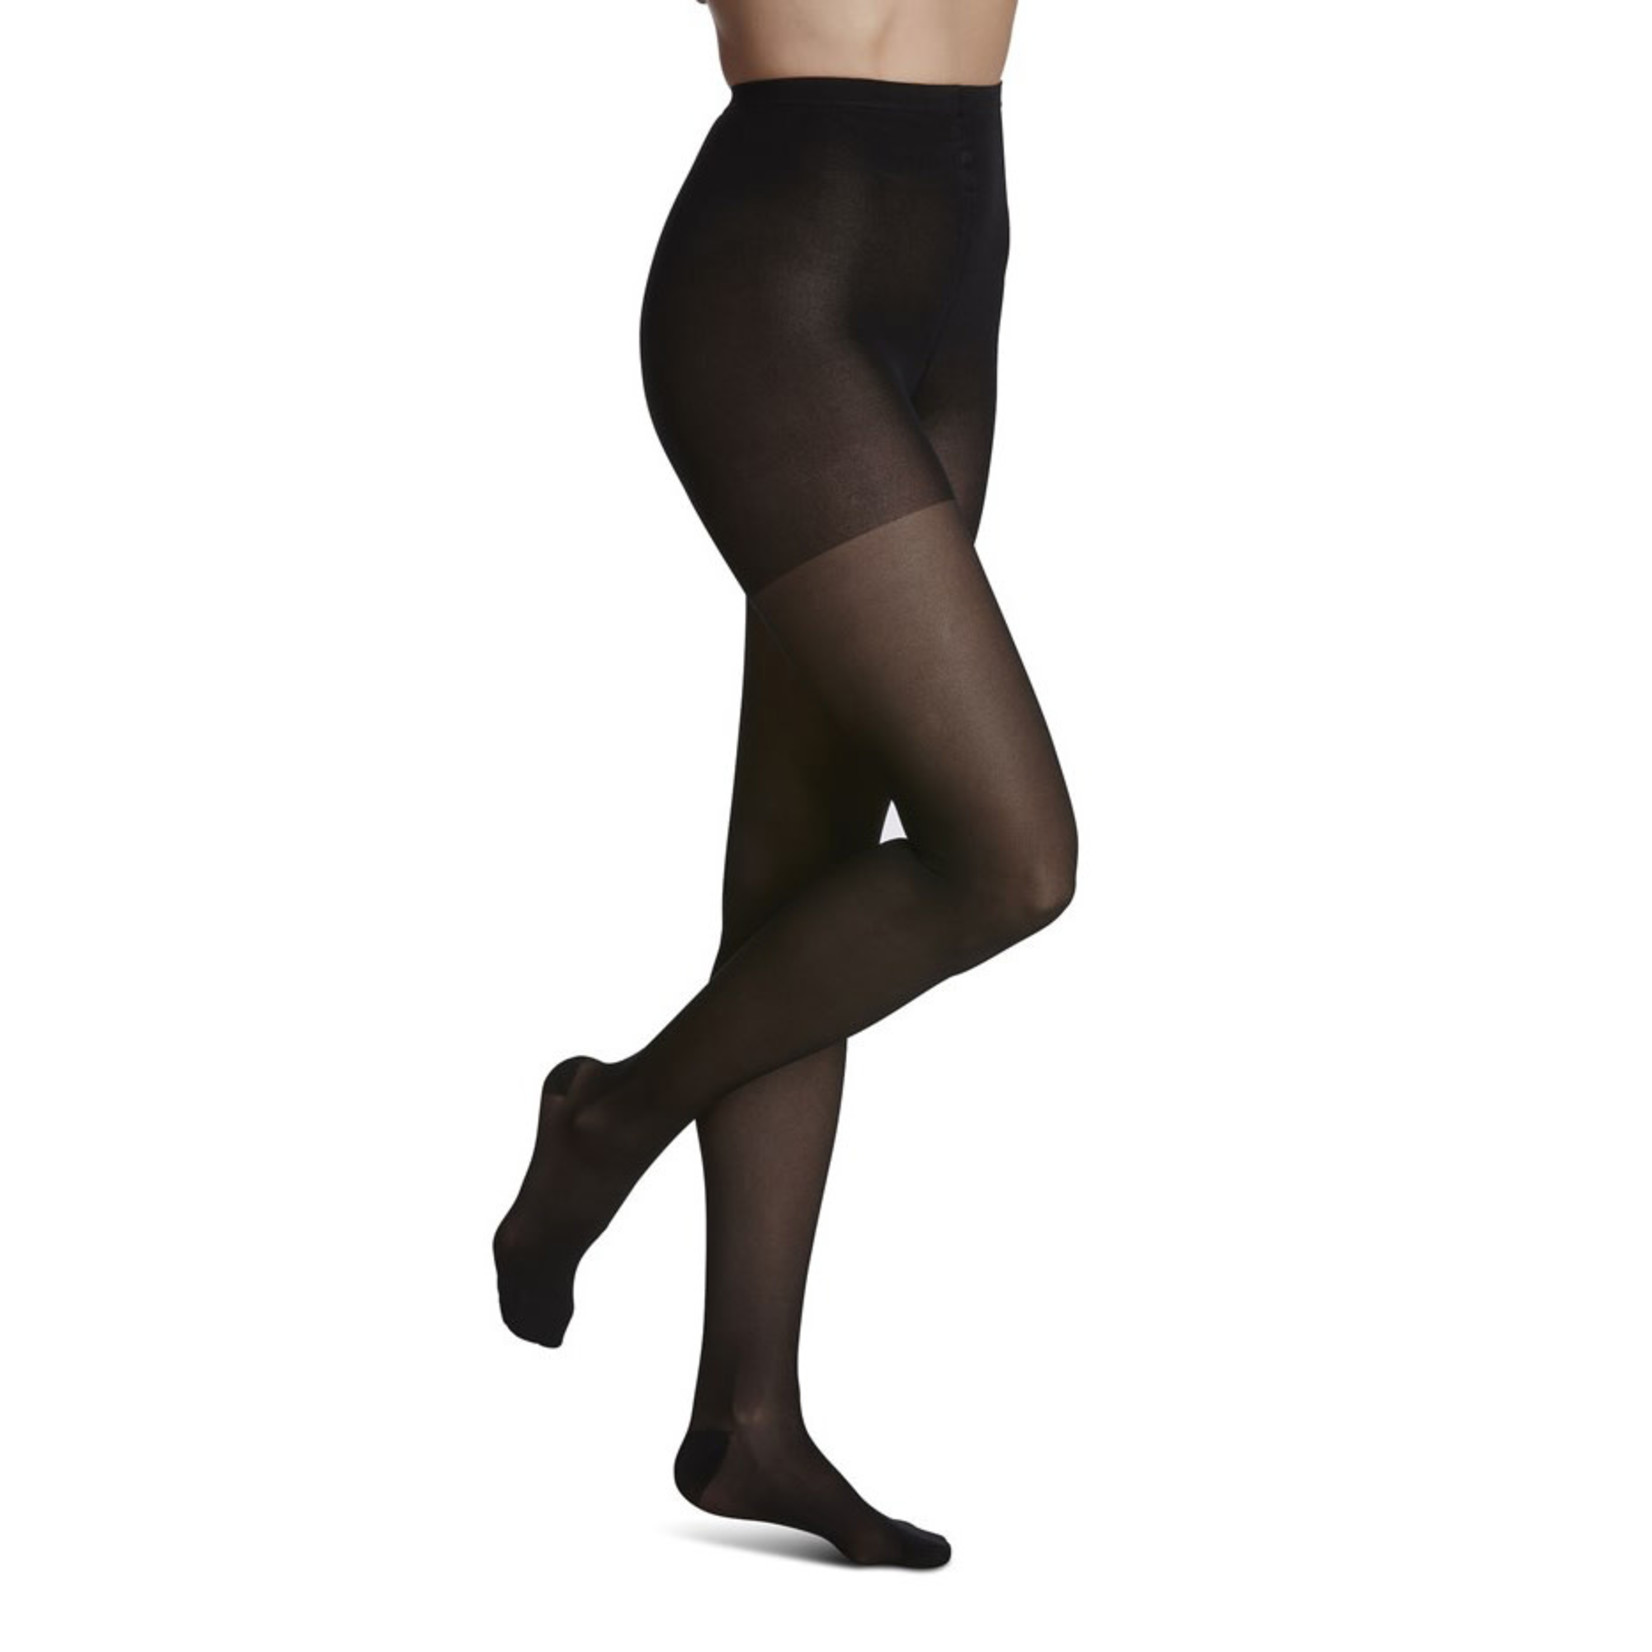 Sigvaris Graduated Compression Hosiery Style Sheer 780 Warm Sand - The  Nursing Store Inc.